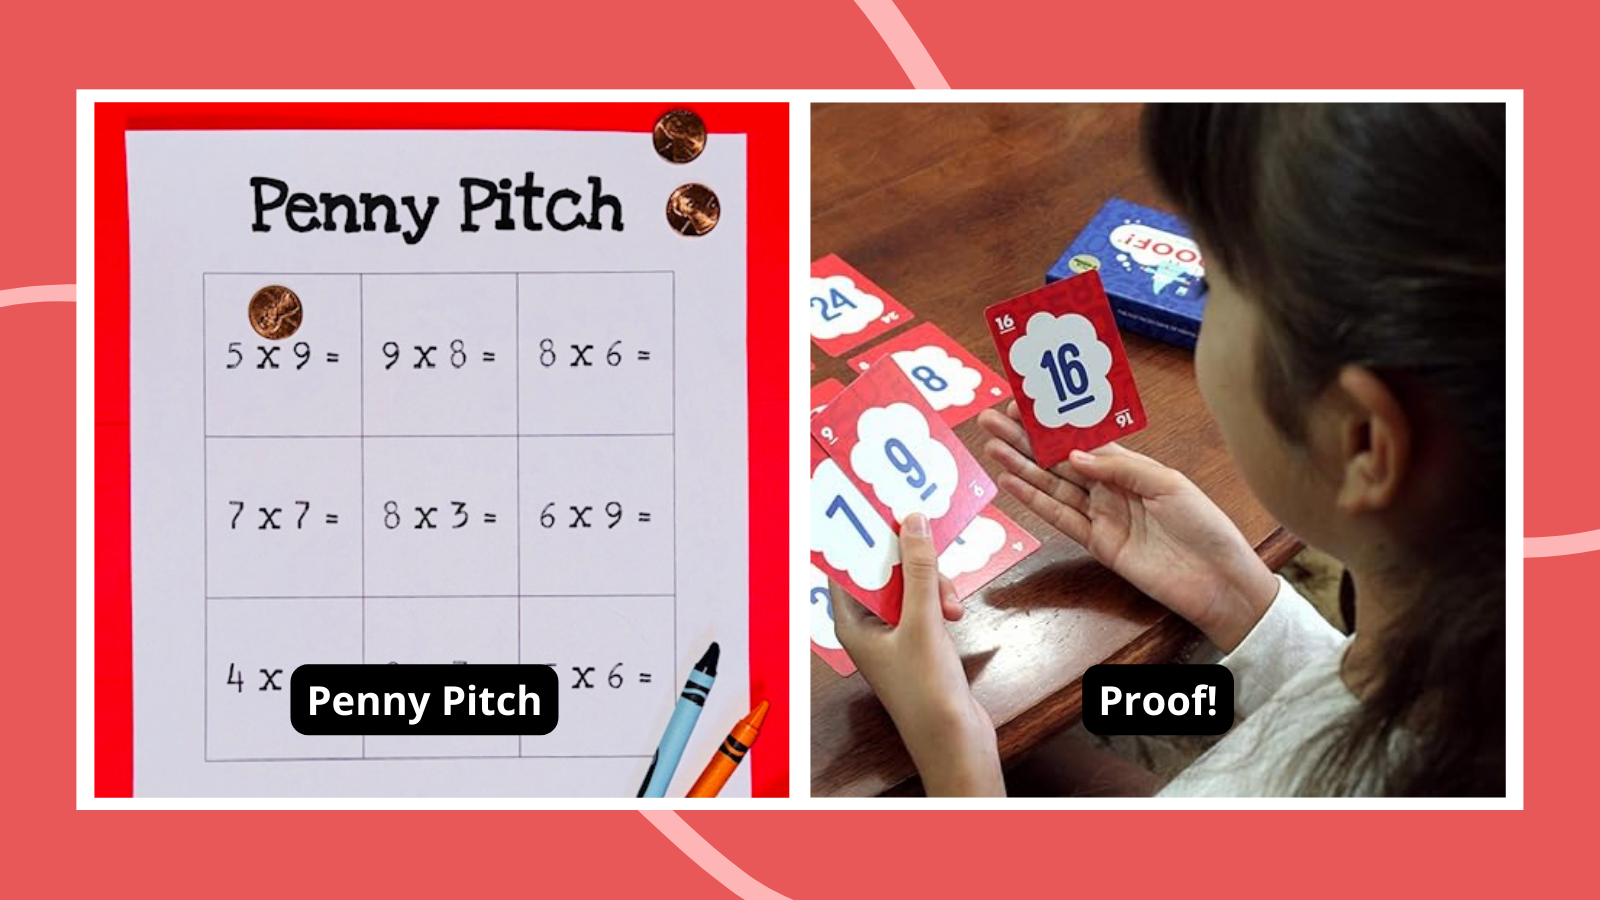 Examples of classroom games including Penny Pitch and Proof!